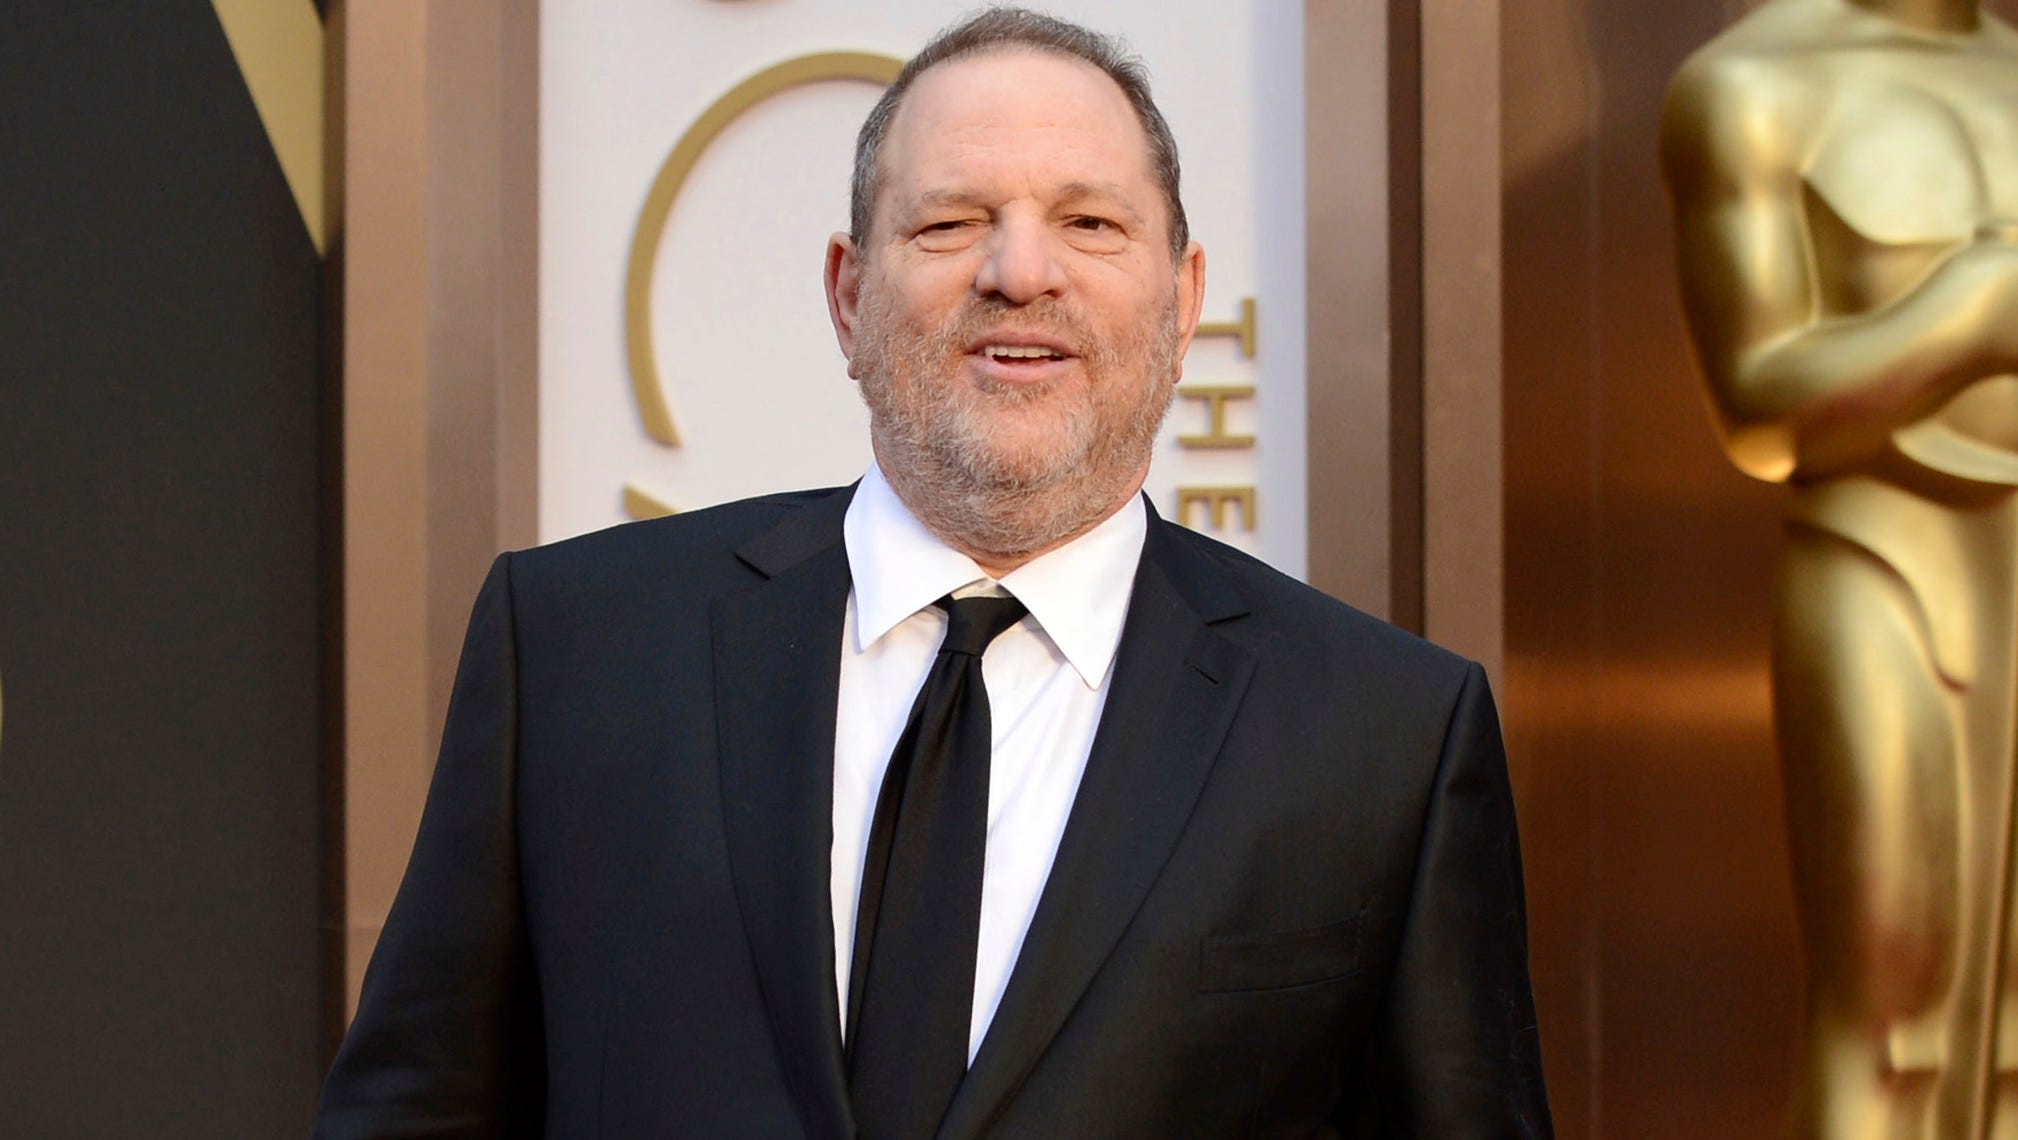 Harvey Weinstein scandal: LAPD investigating charge Weinstein raped actress  in 2013